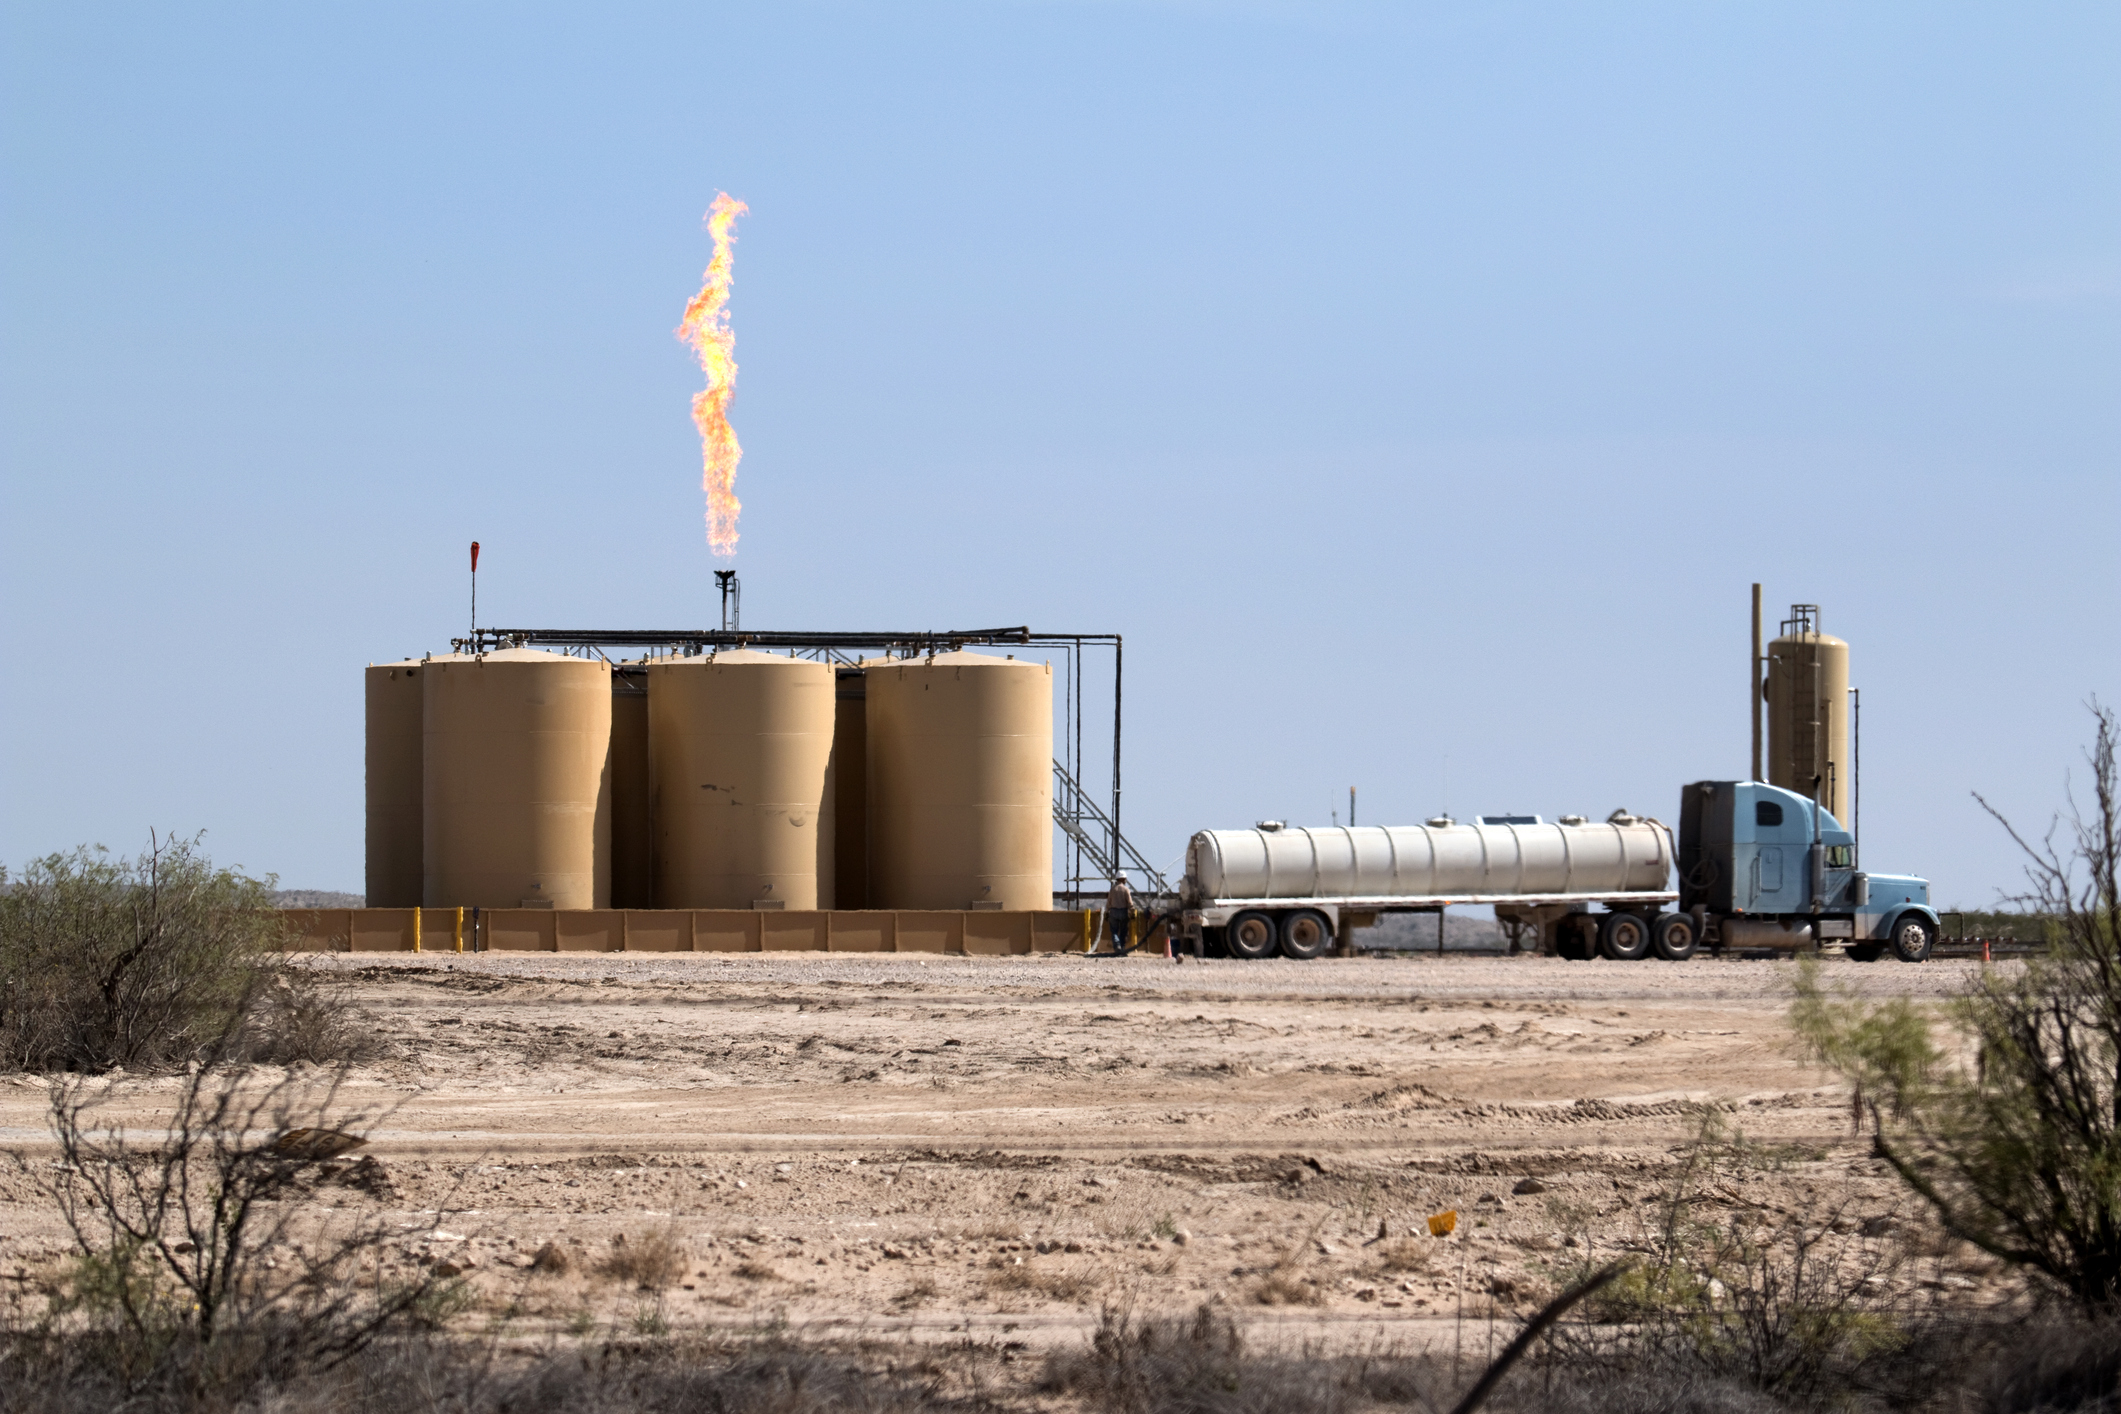 Oil refinery tanks with a flare stack burning off gas and a tanker truck parked beside in a desert area